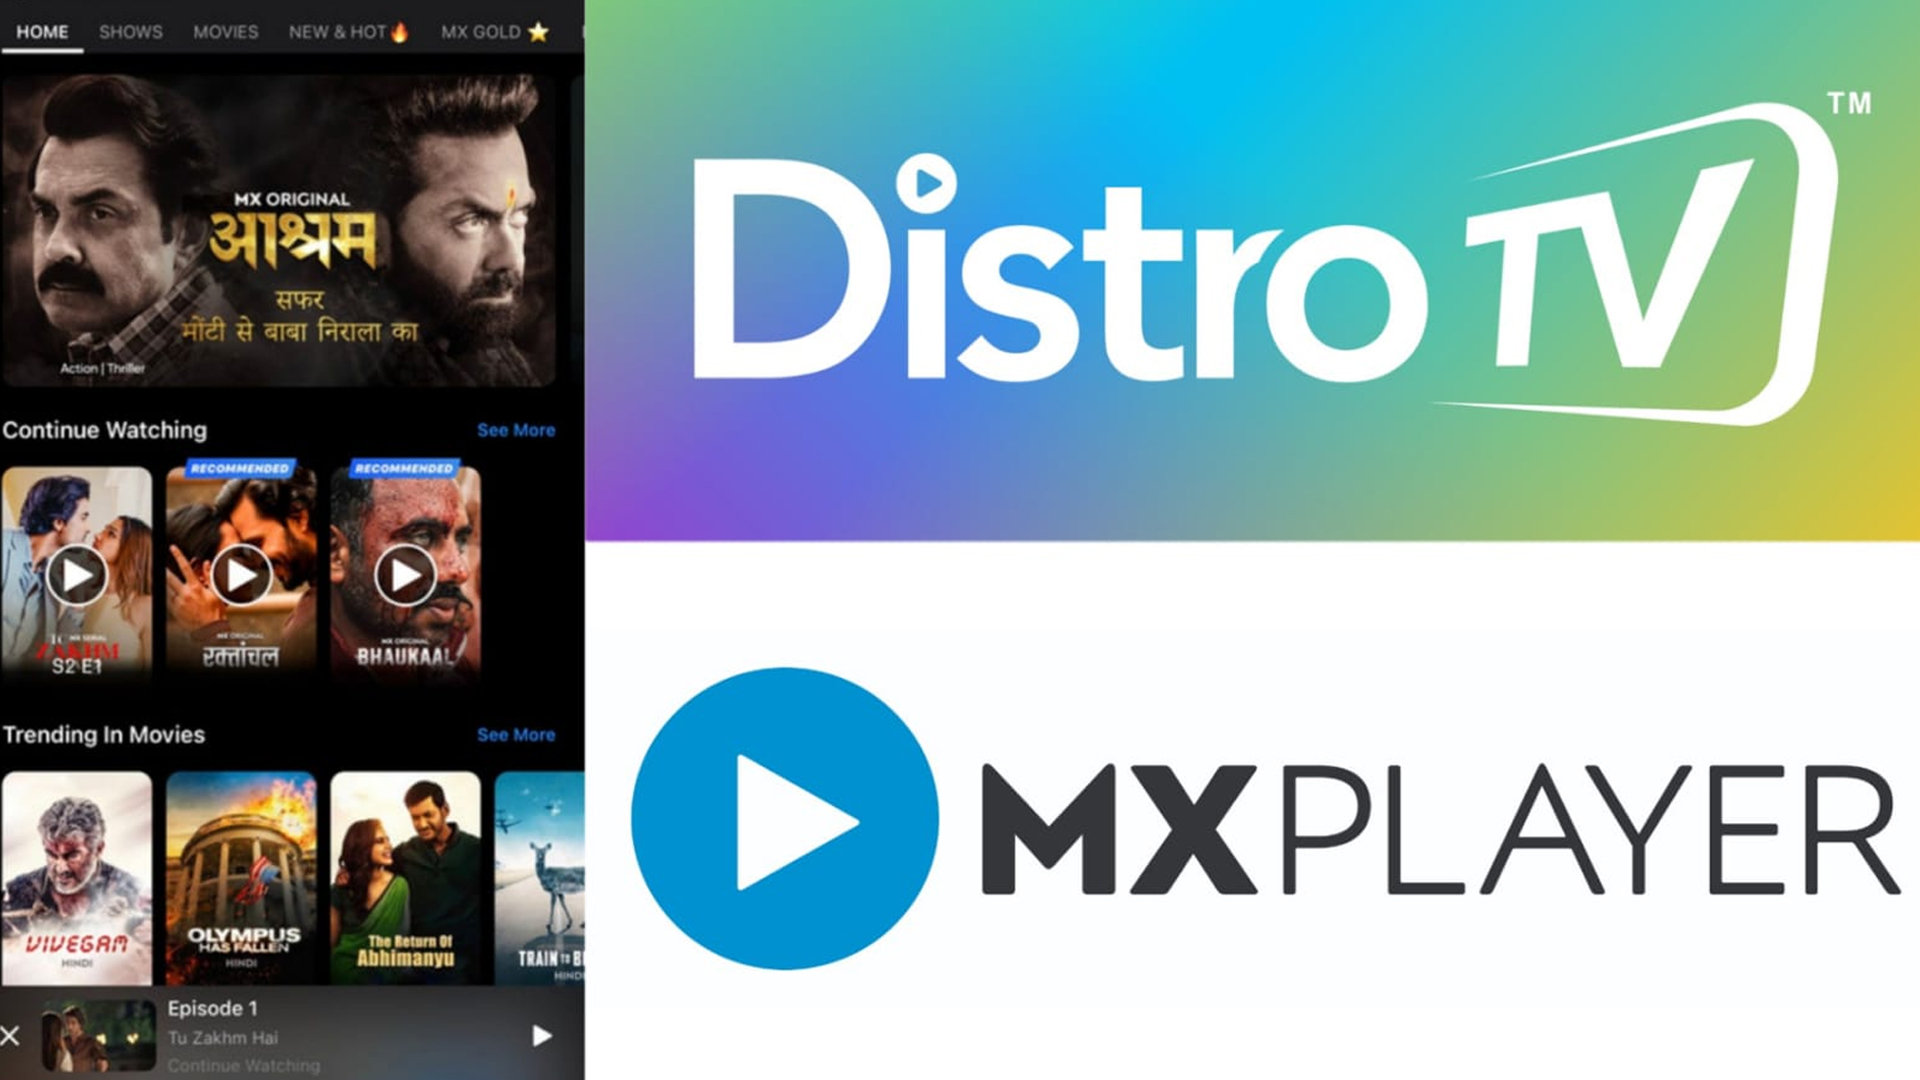 MX Player and DistroTV partner to build India’s largest Live TV Streaming Service